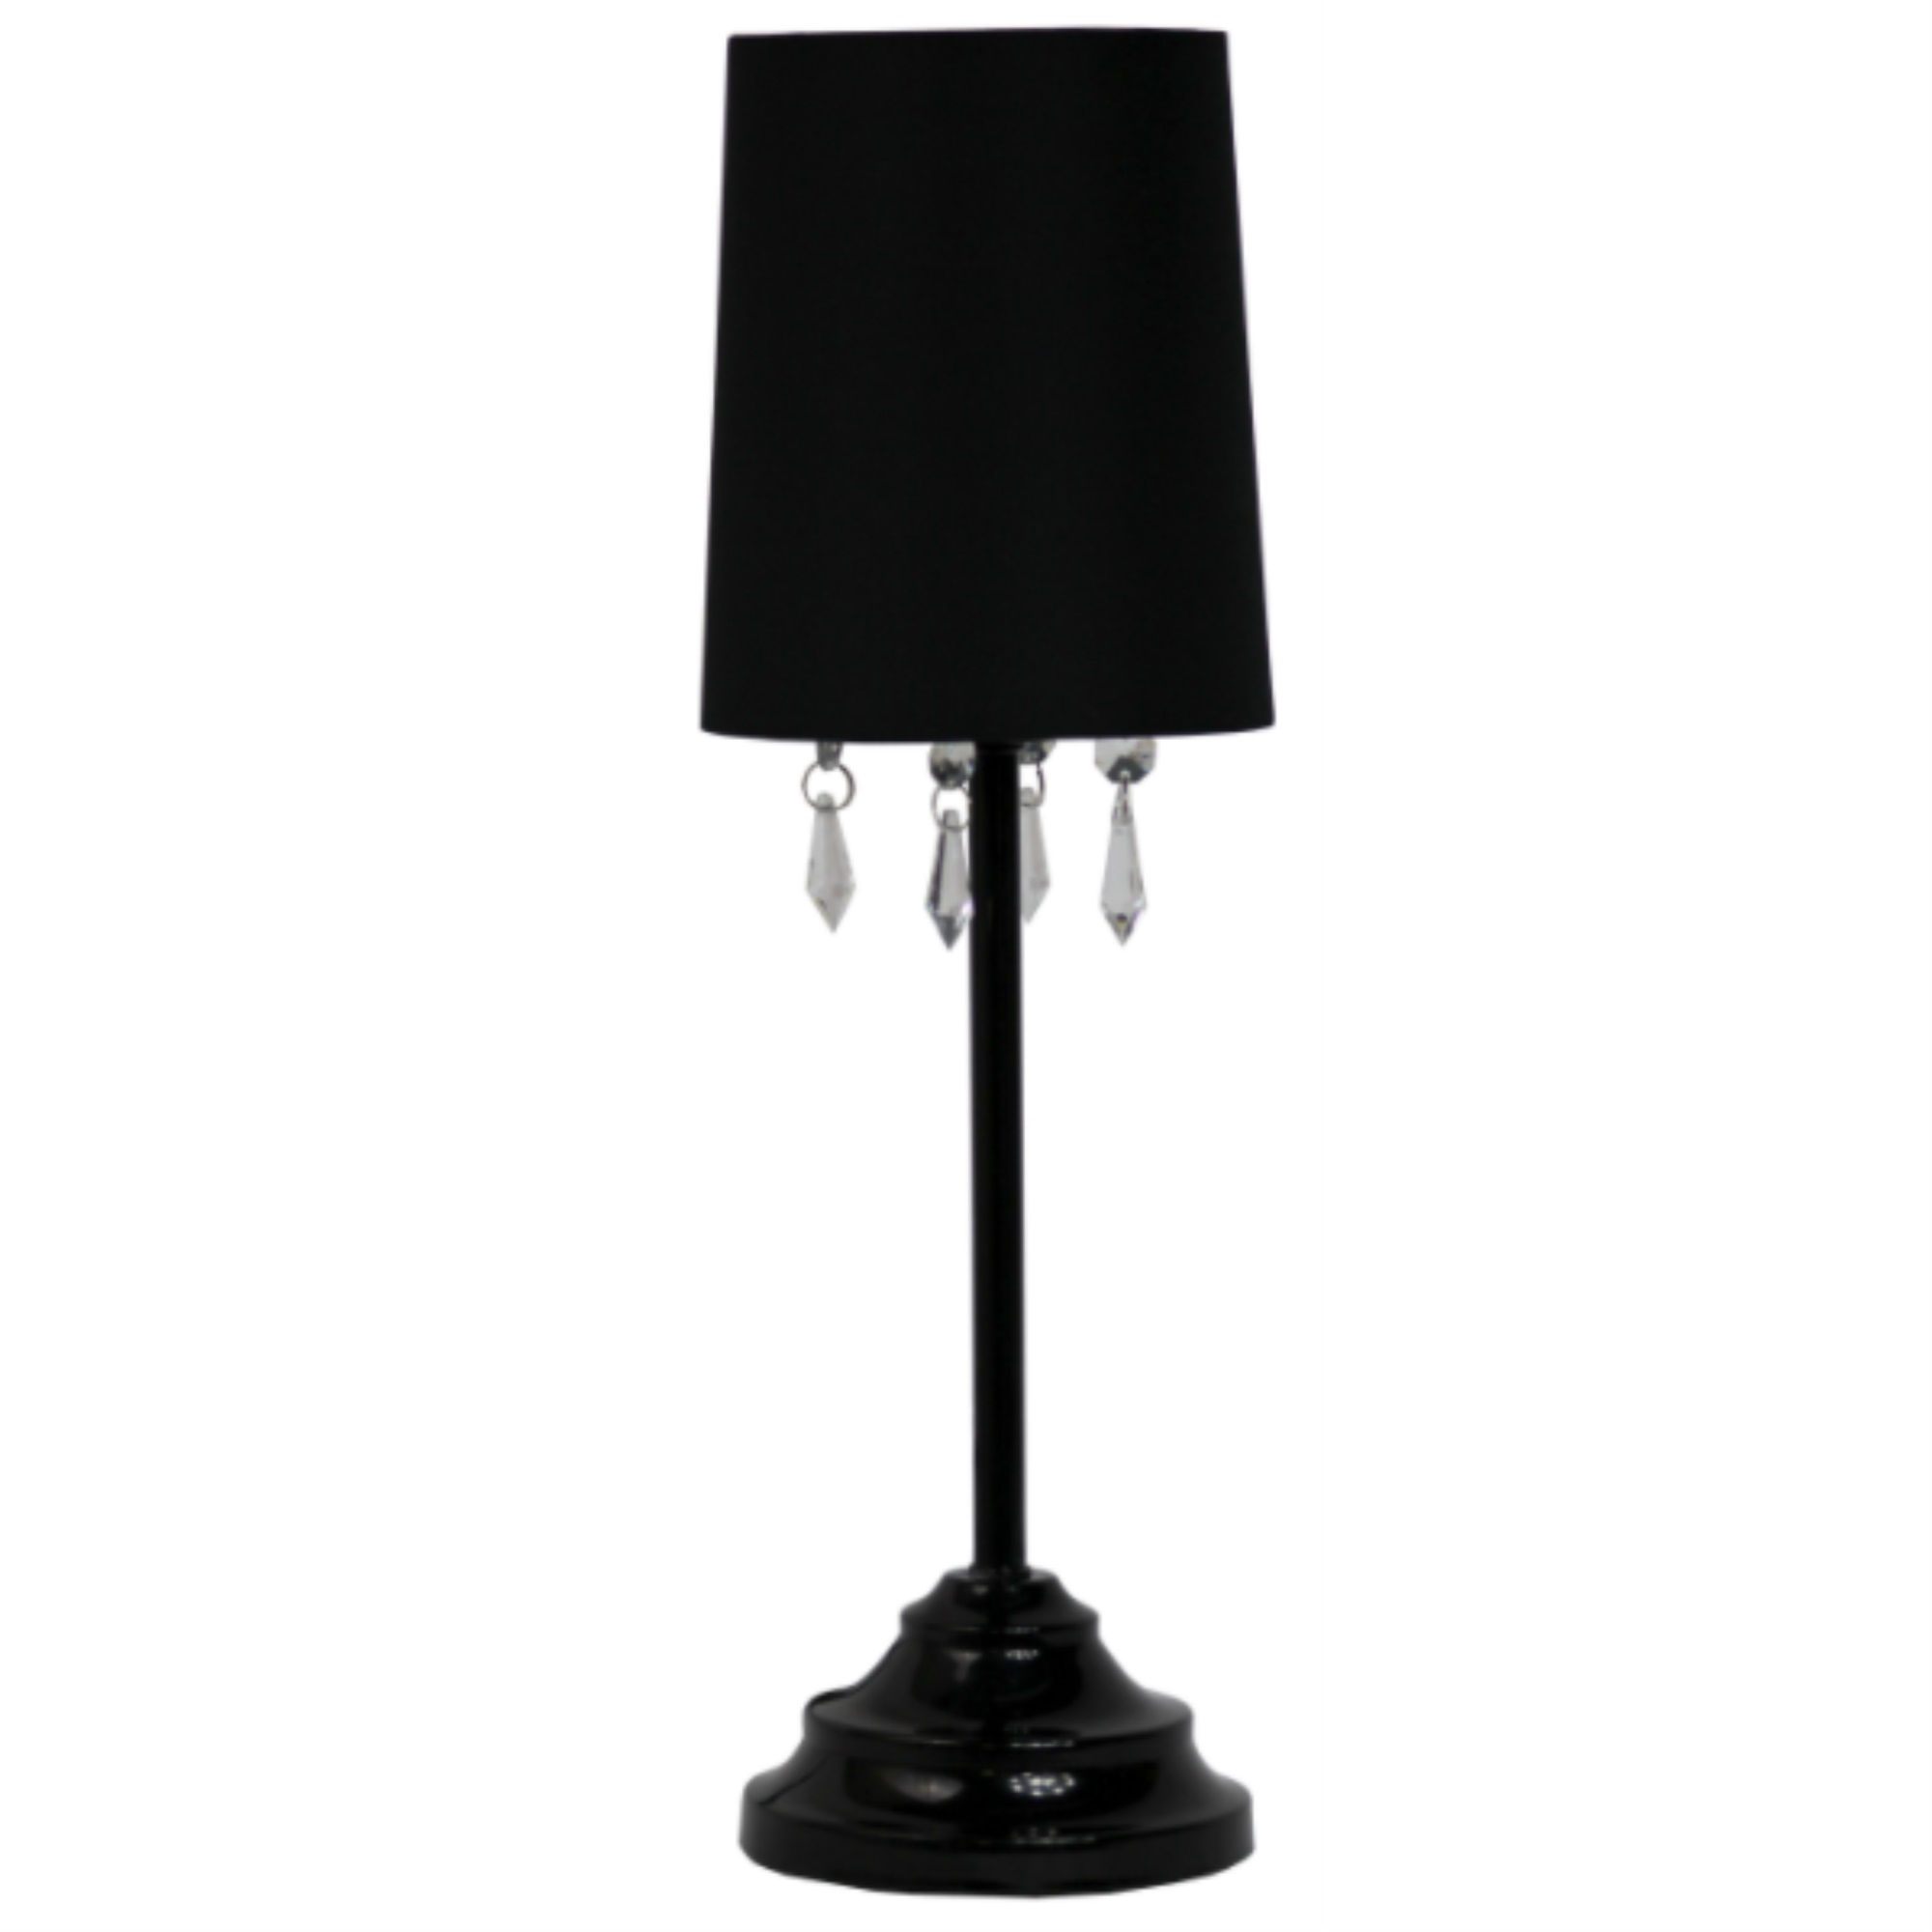 Simple Designs Table Lamp with Black Shade and Hanging Acrylic Beads